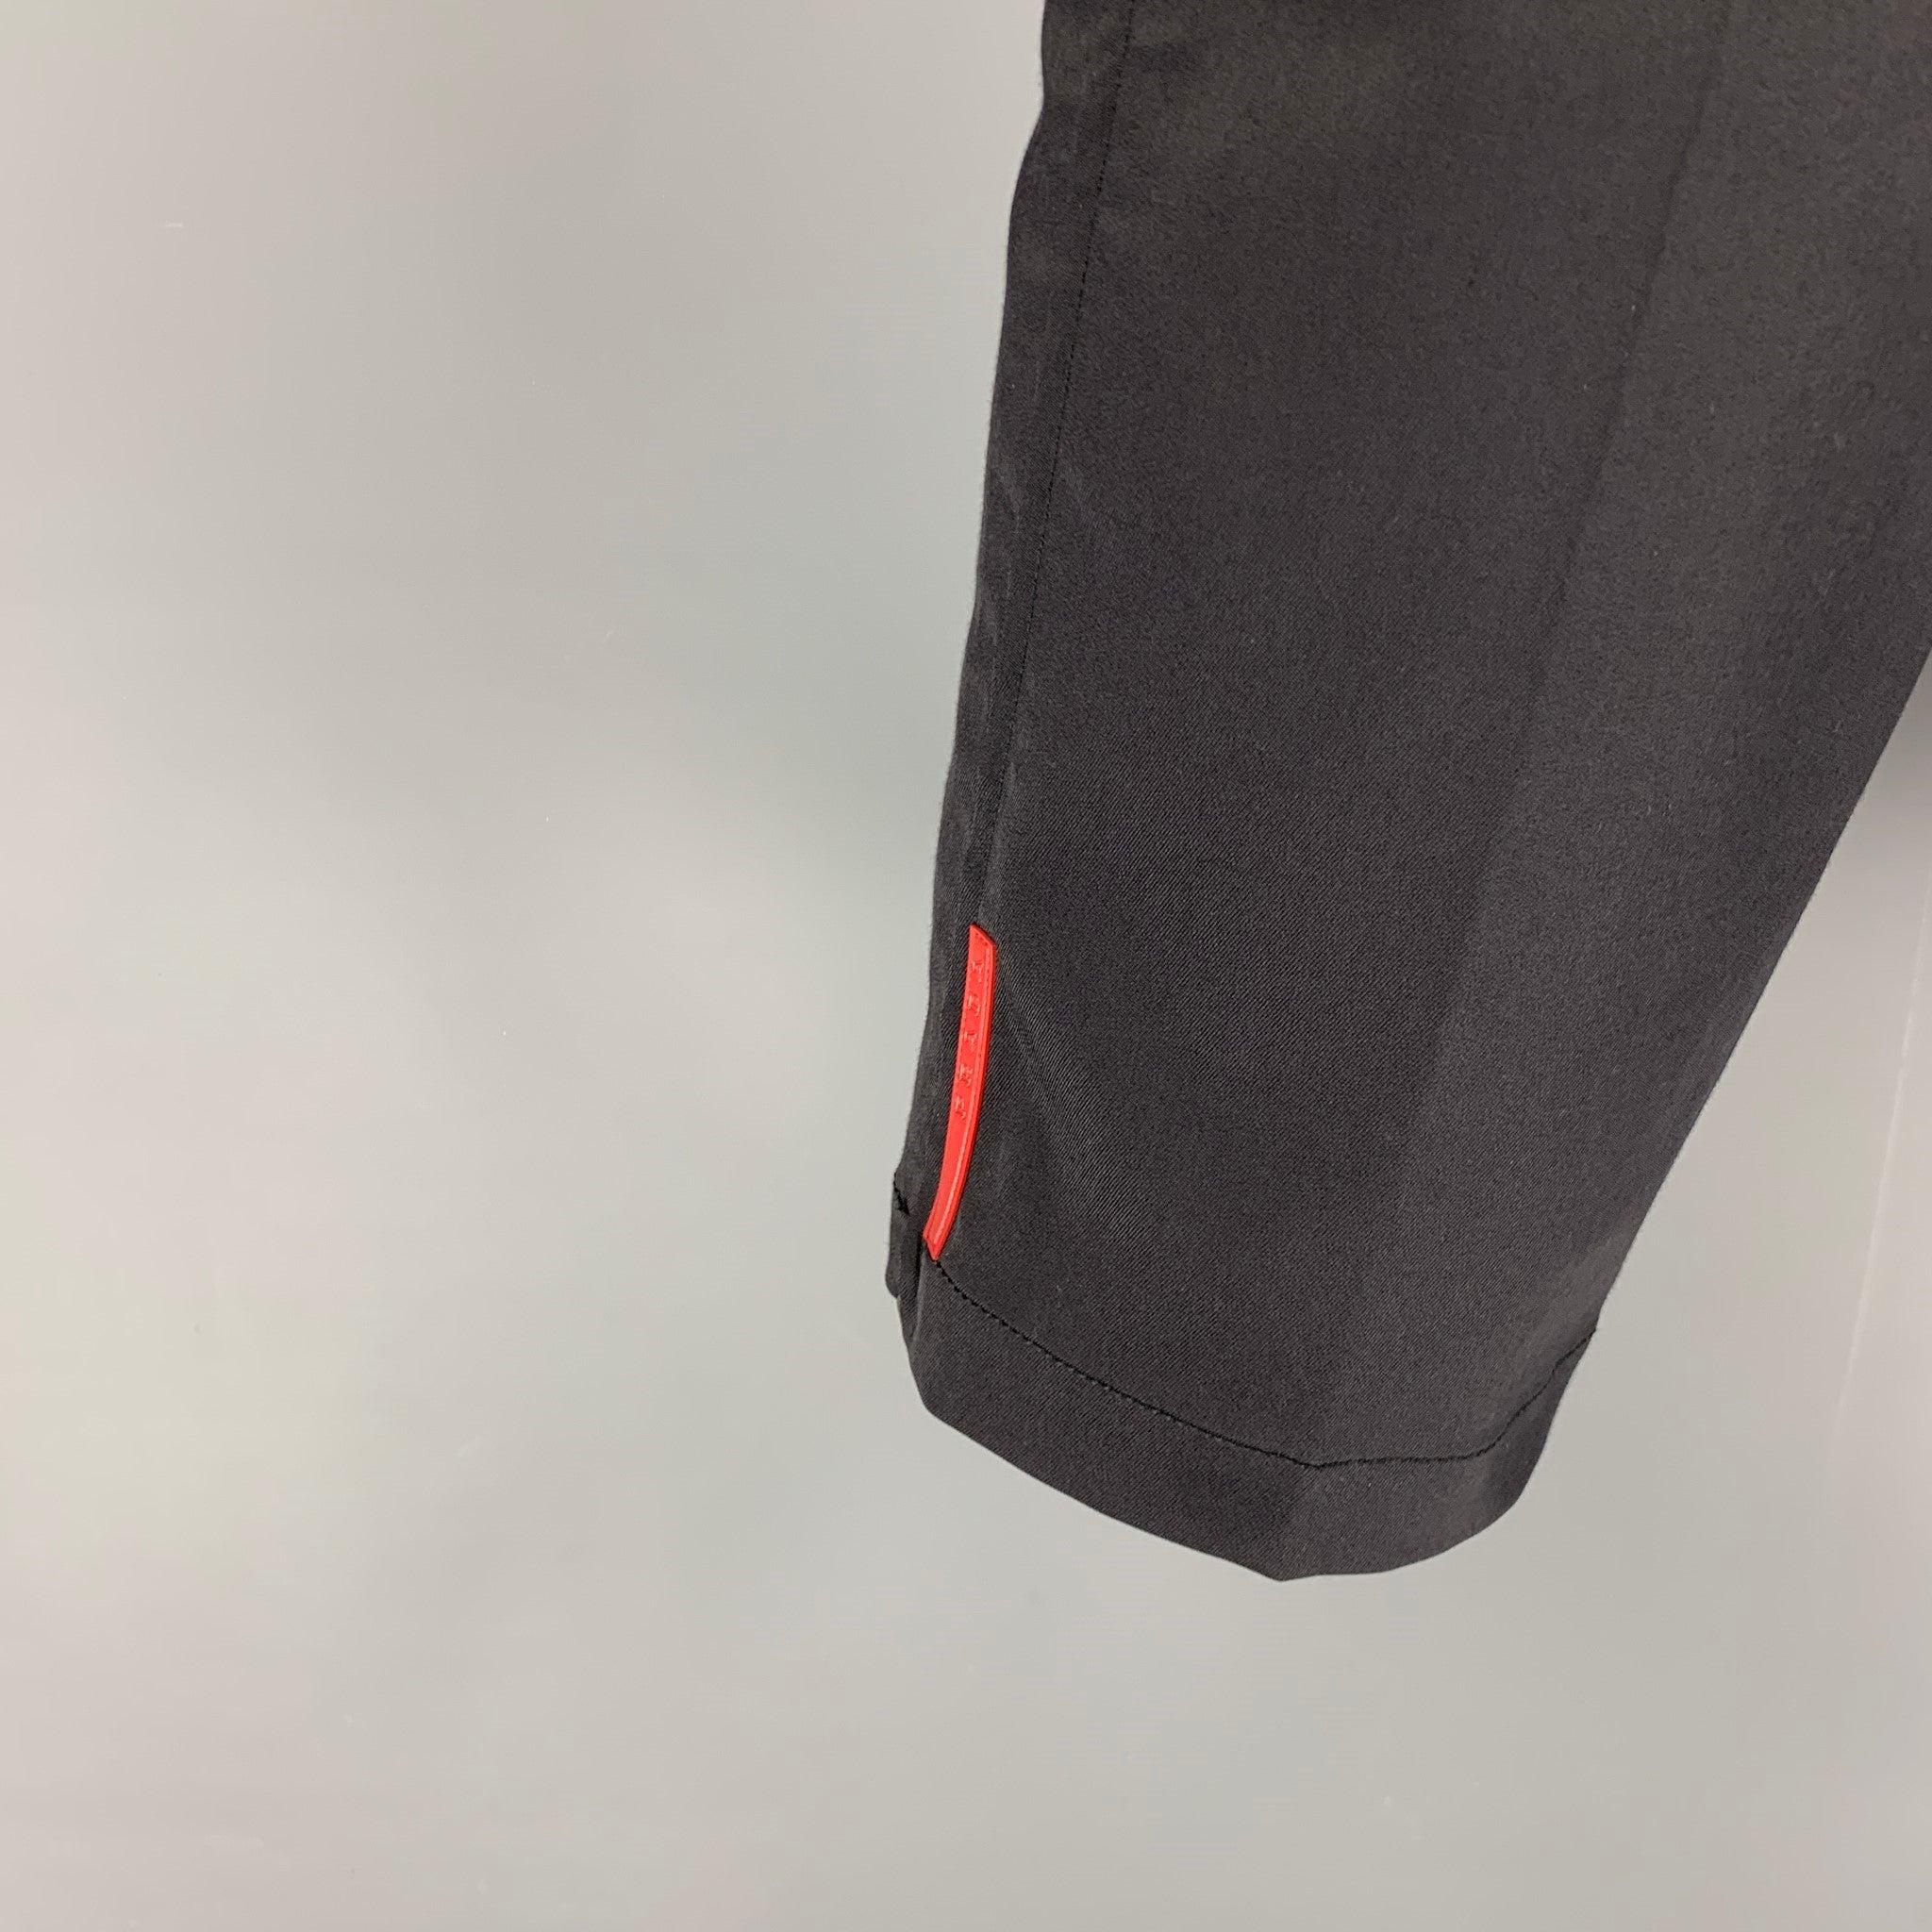 PRADA dress pants comes in a black cotton blend featuring a flat front, zipped cuffs, red logo detail, front tab, and a button fly closure. Made in Italy.Excellent
Pre-Owned Condition. Fabric tag removed.  

Marked:   Size tag removed. 